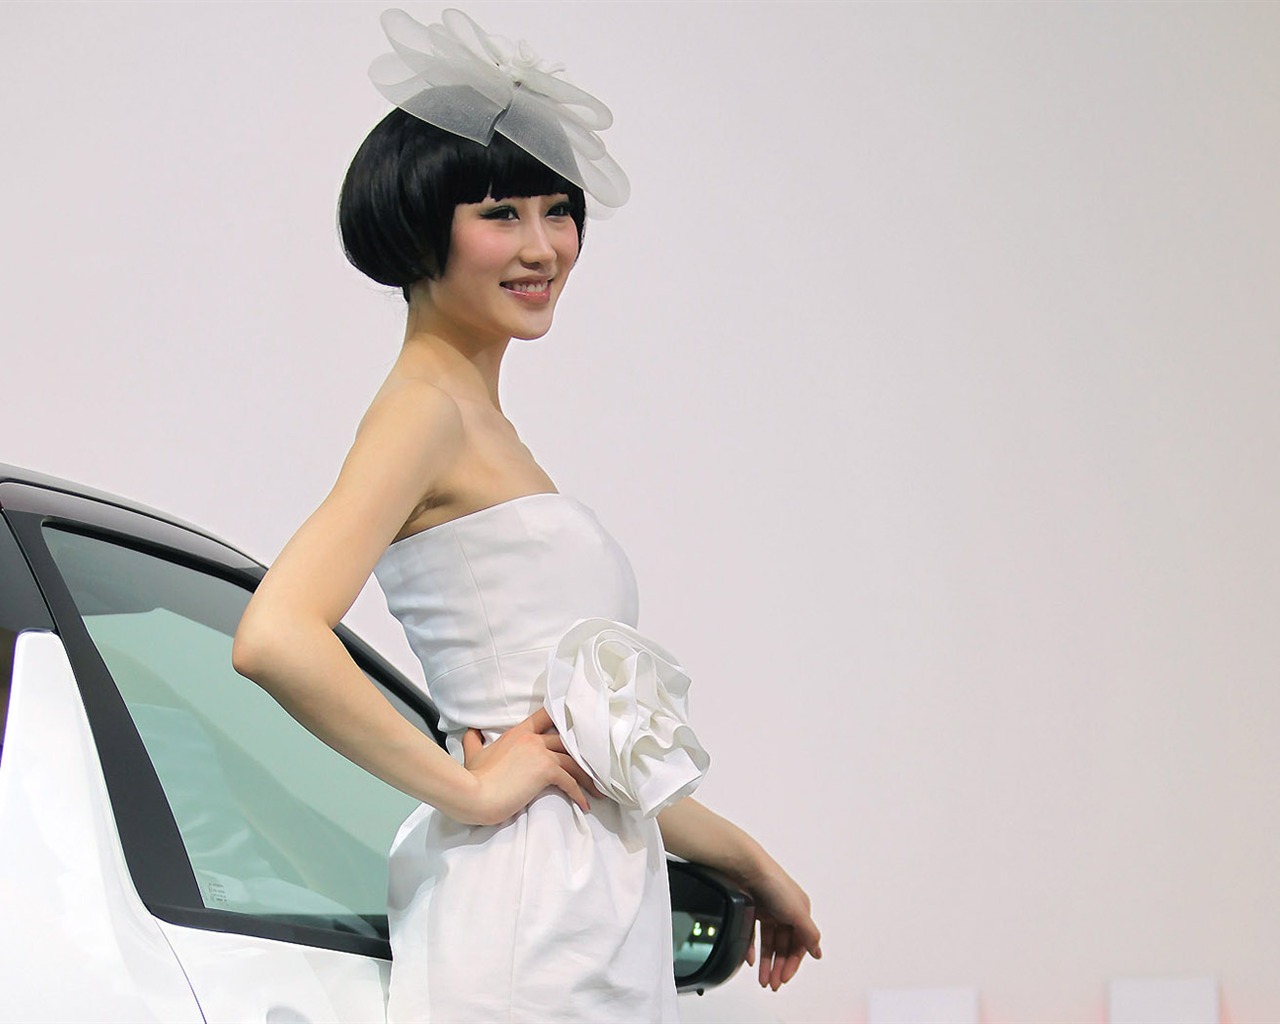 2010 Beijing Auto Show car models Collection (2) #8 - 1280x1024